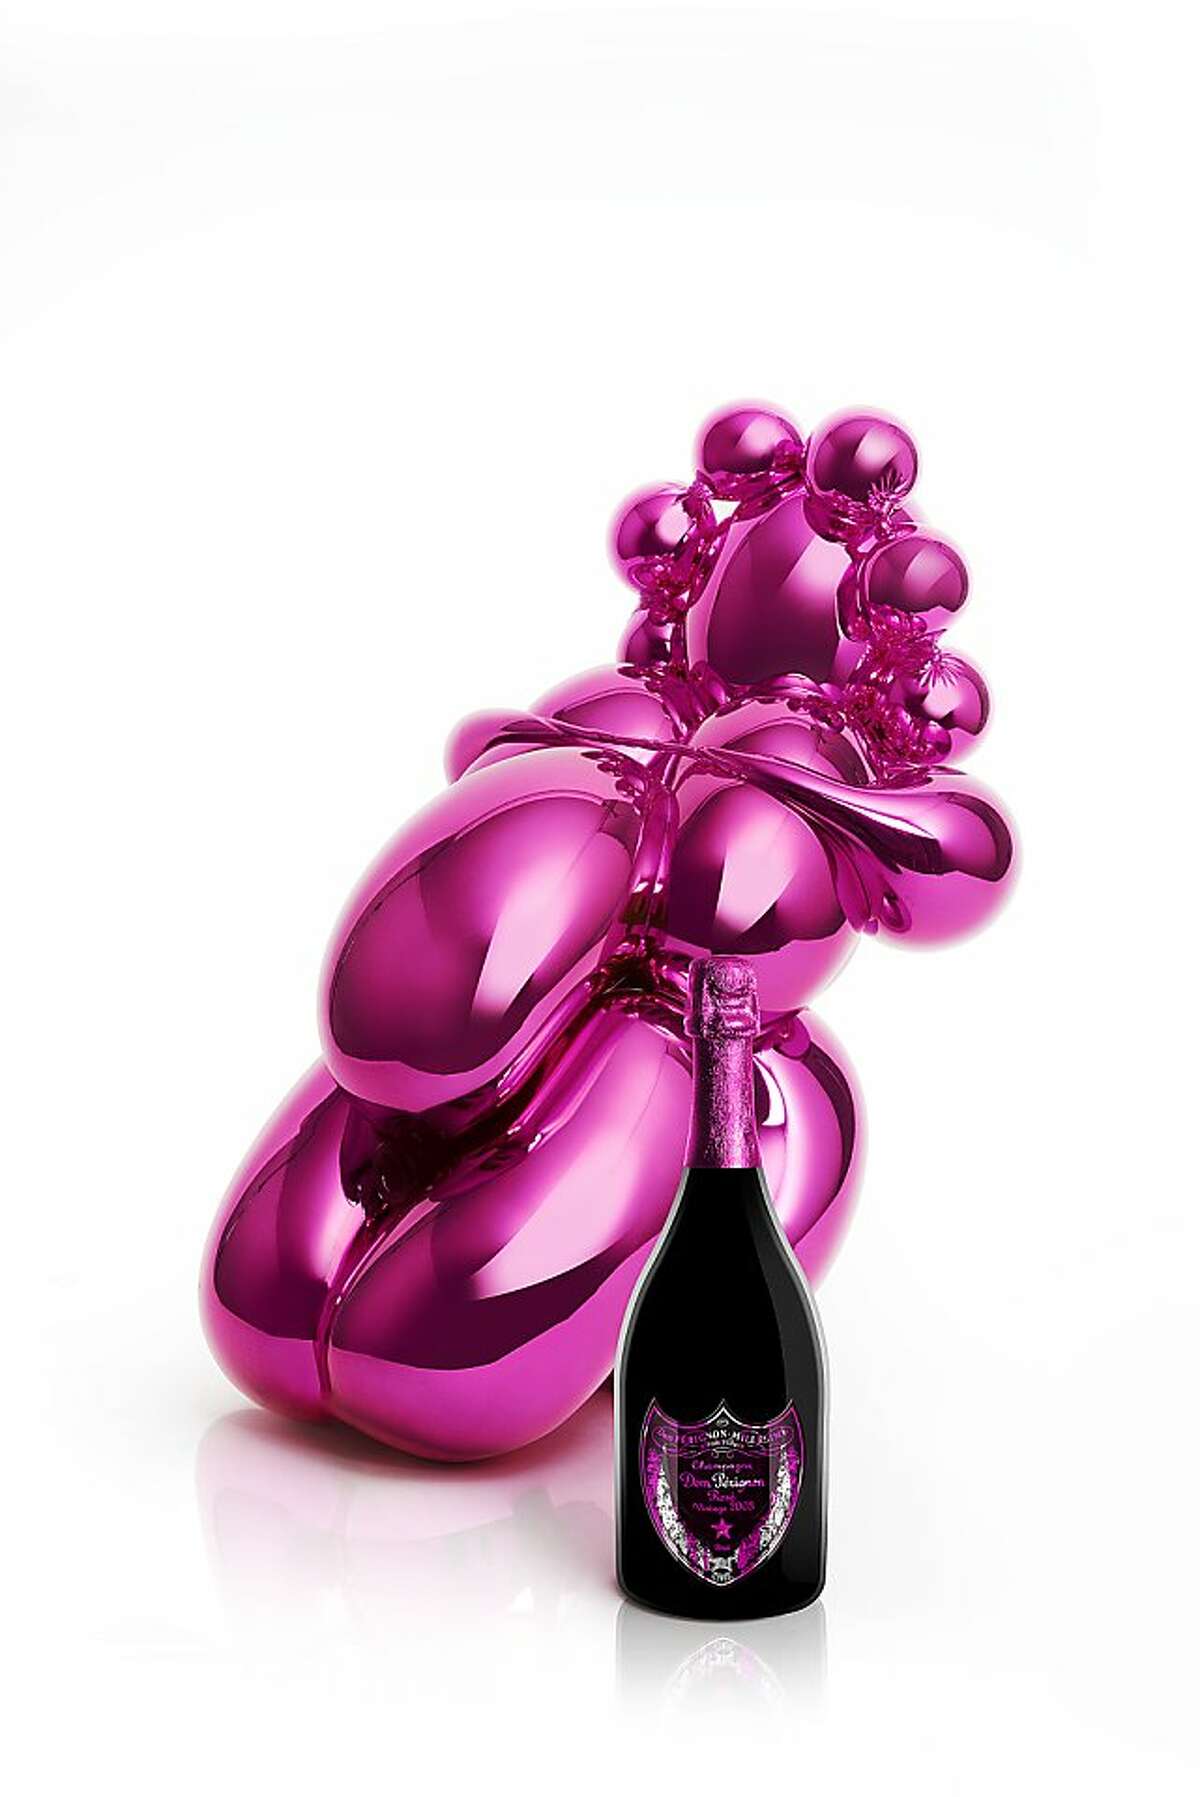 Several hundreds "Balloon Venus for Dom Perignon" sculptures by Jeff Koons are being created in connection with the Sept. 2013 release of the Dom Perignon Rose Vintage 2003. The sculpture, which comes apart to allow the rose to be nestled inside it, sells for about $20,000, and is available at www.domperignon.com/limitededition.